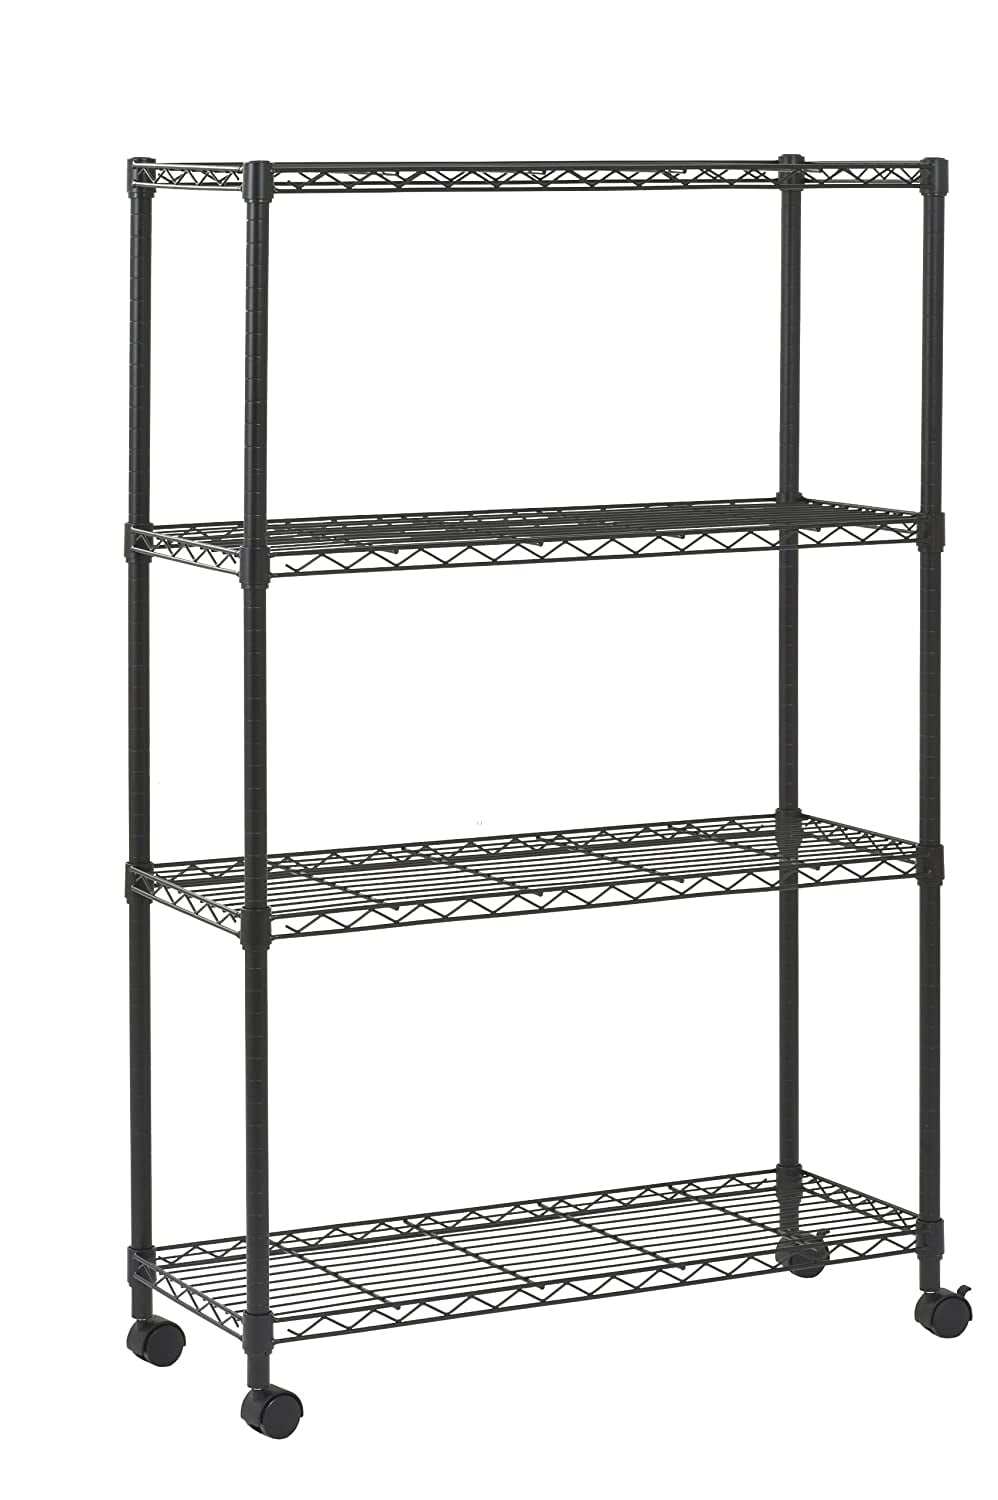 Sandusky MWS361454 Mobile Commercial Wire Shelving, 54